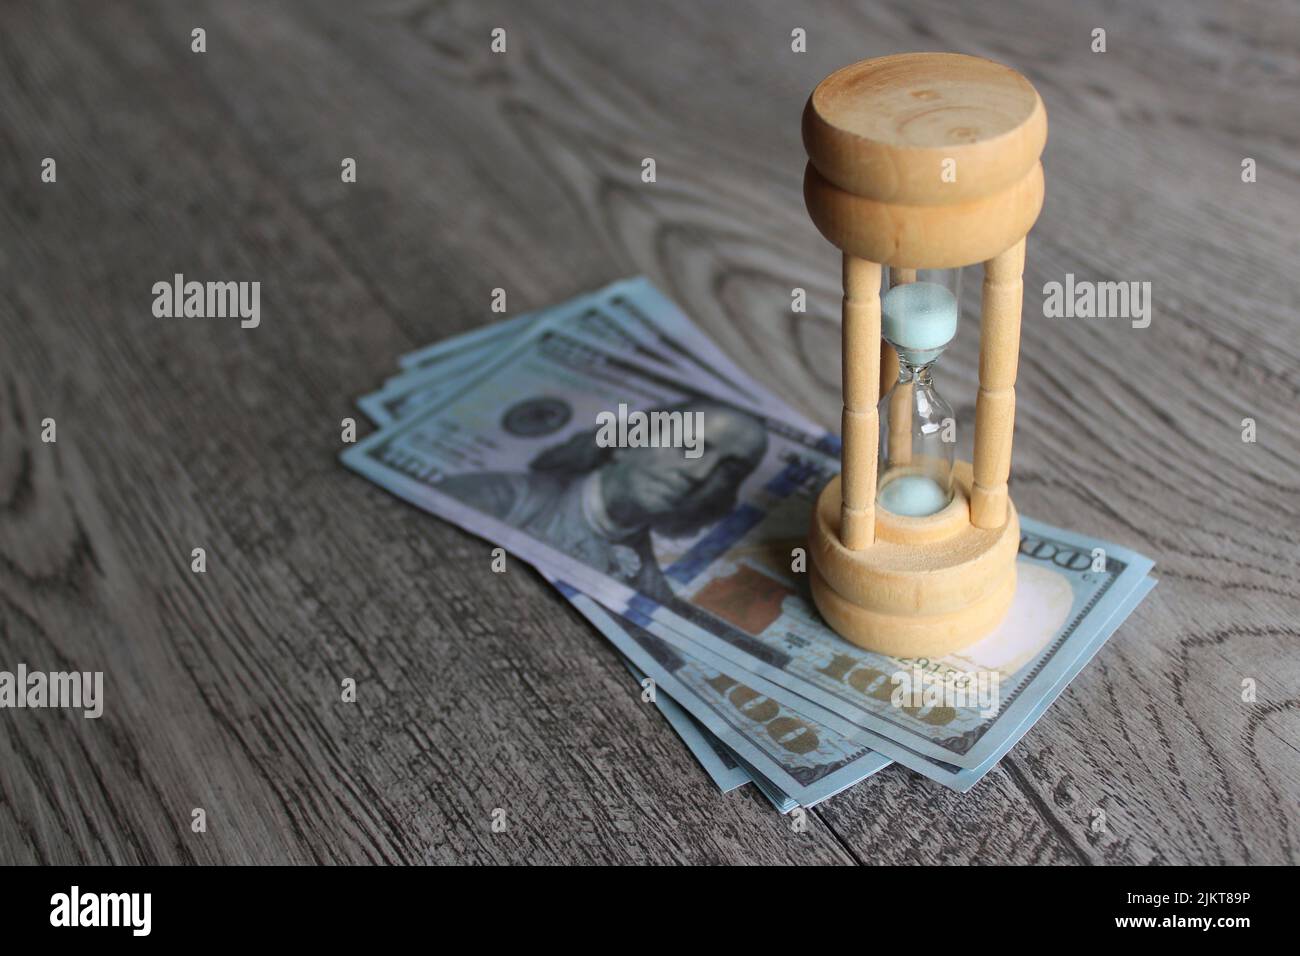 Growth of income over time and return on investment concept. Hourglass and stack of money on table Stock Photo